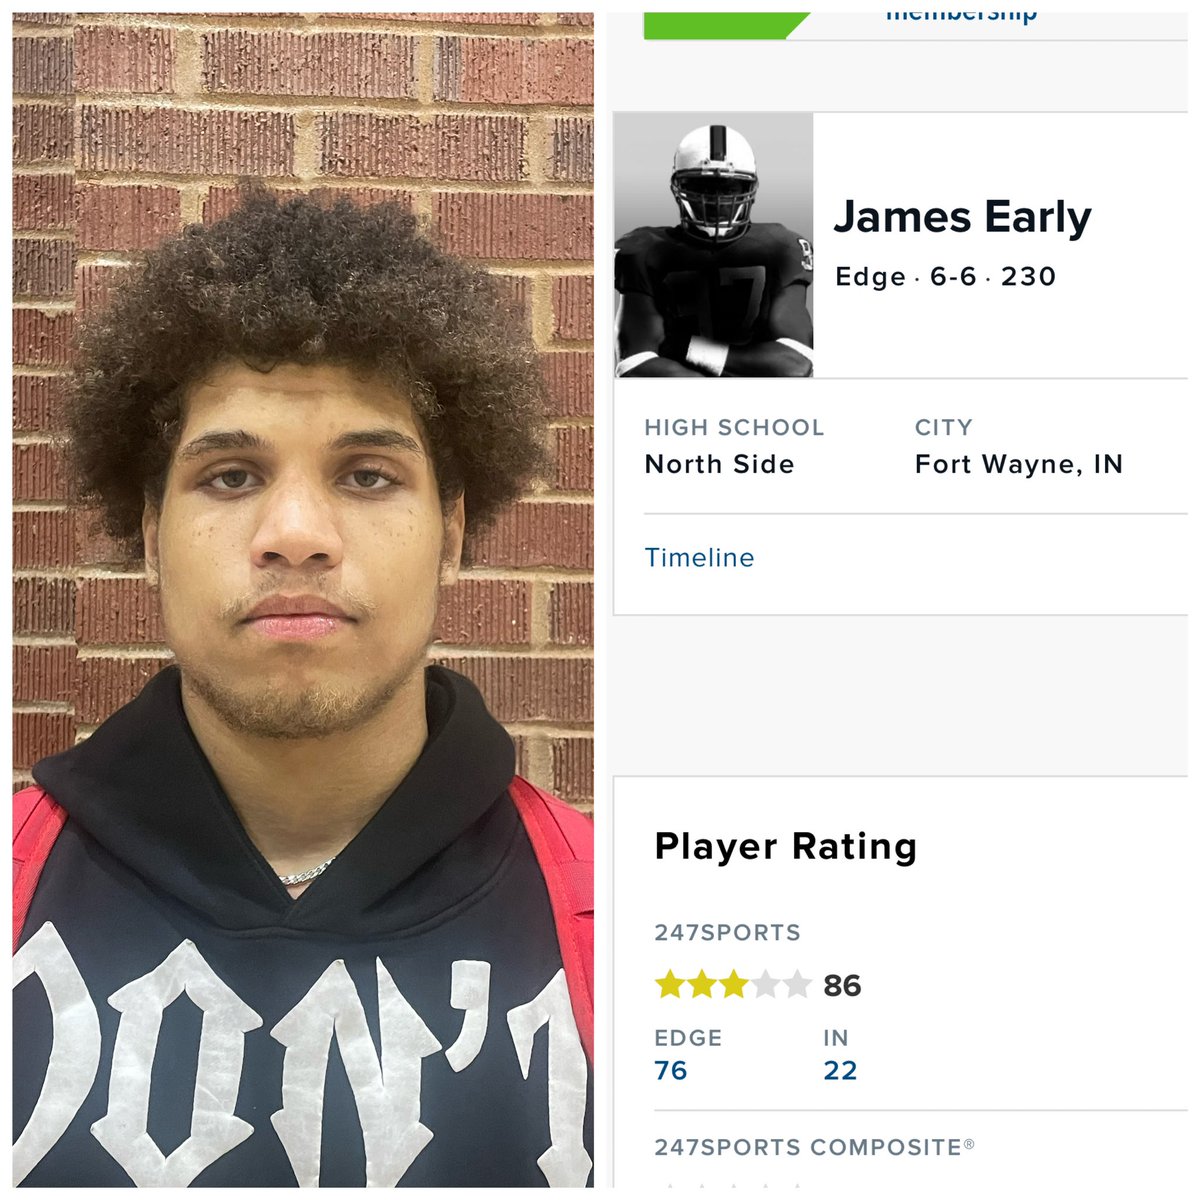 Congratulations James! Well deserved 3-Star ranking from @247sports @AllenTrieu @jamesearly133 @FW_NorthSideFB keep working!